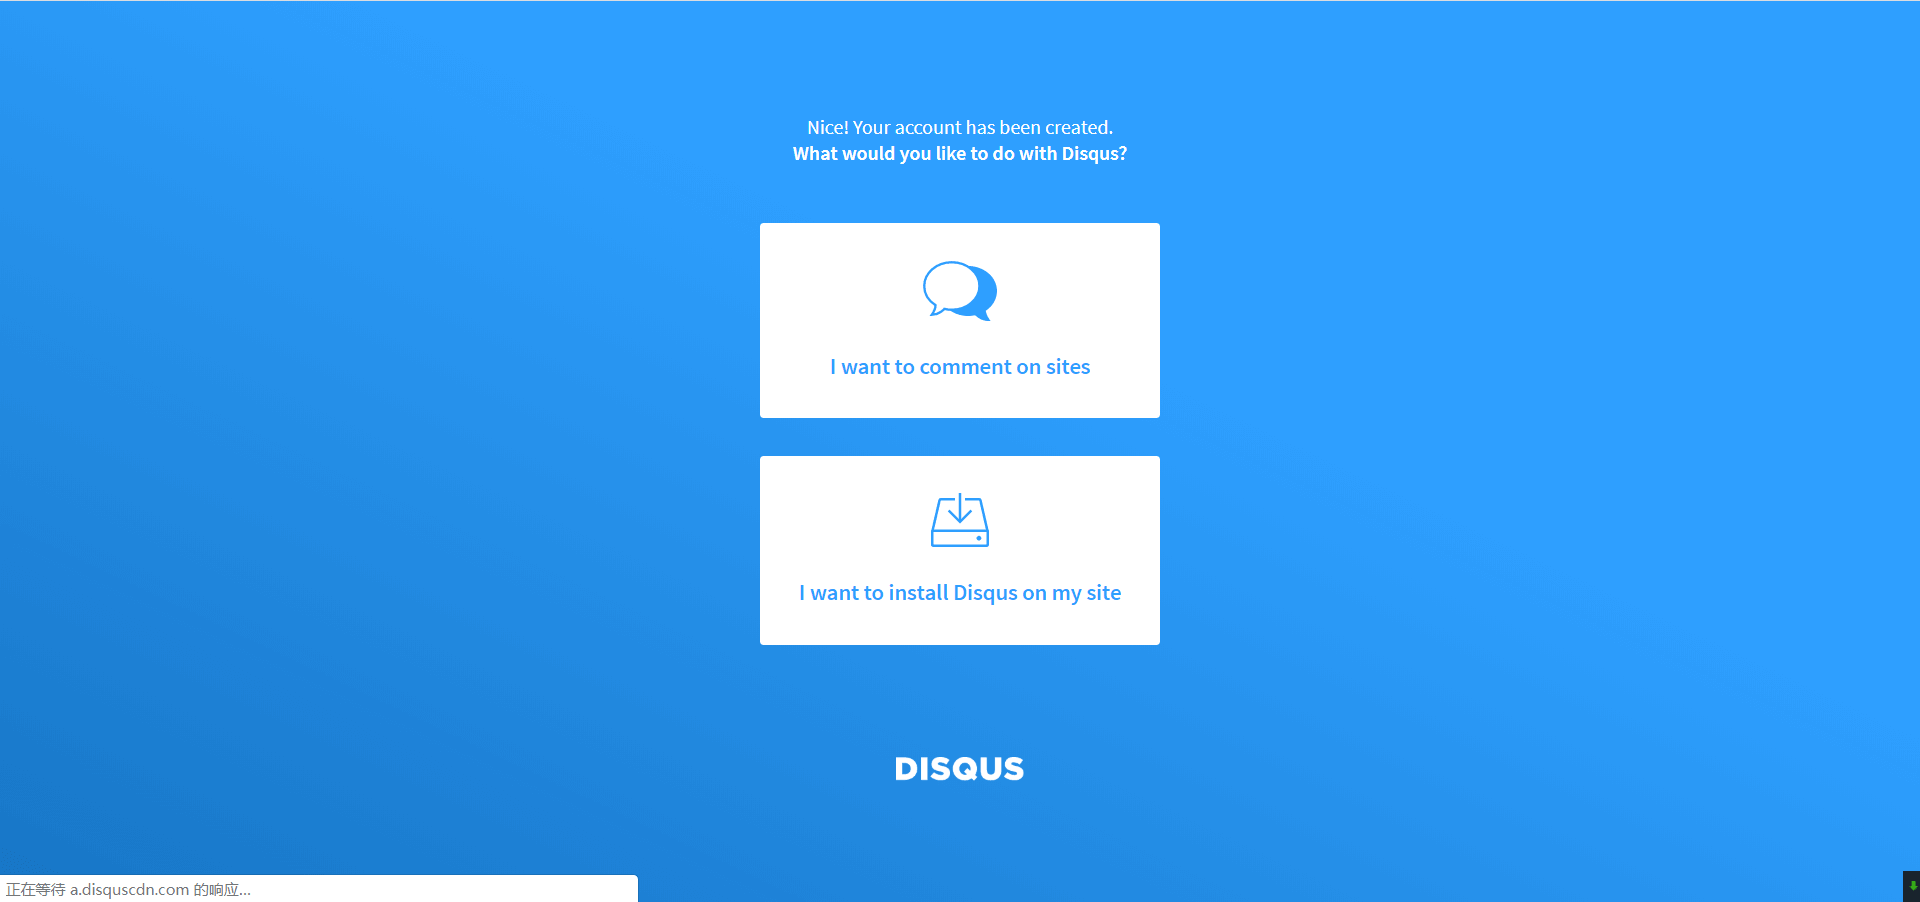 I want to install Disqus on my site